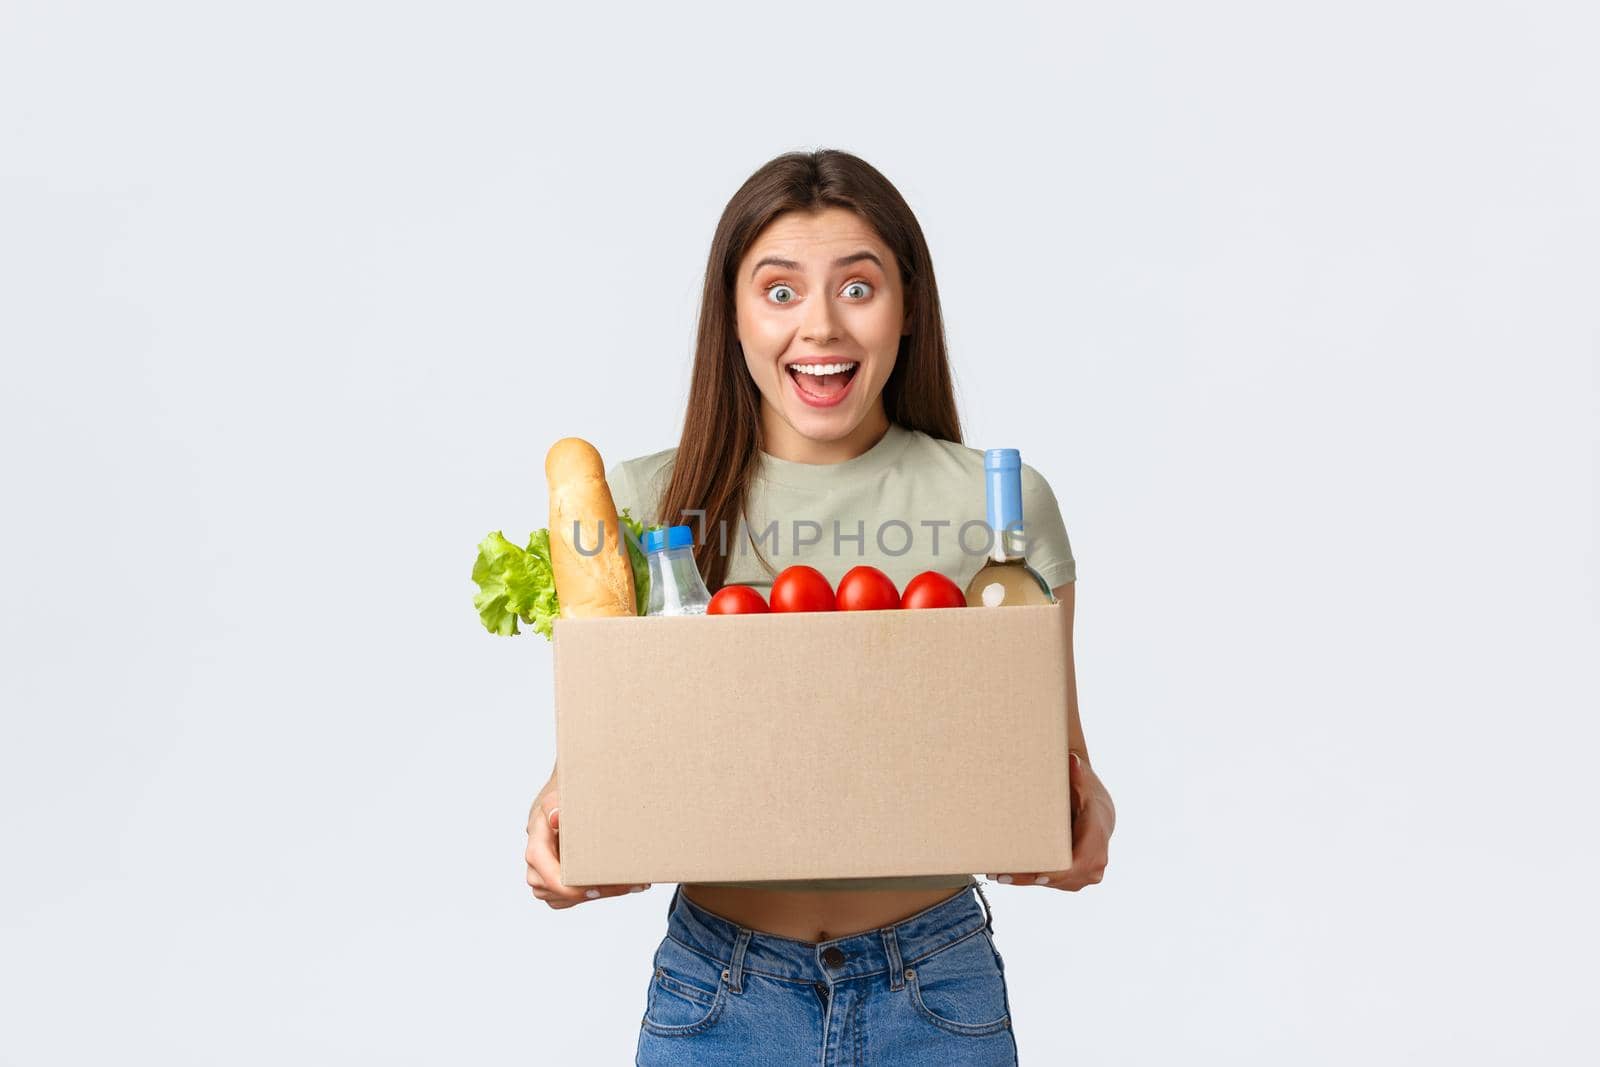 Online home delivery, internet orders and grocery shopping concept. Excited woman satisfied with quality of deliver service from local shop, holding groceries in box and smiling amazed.